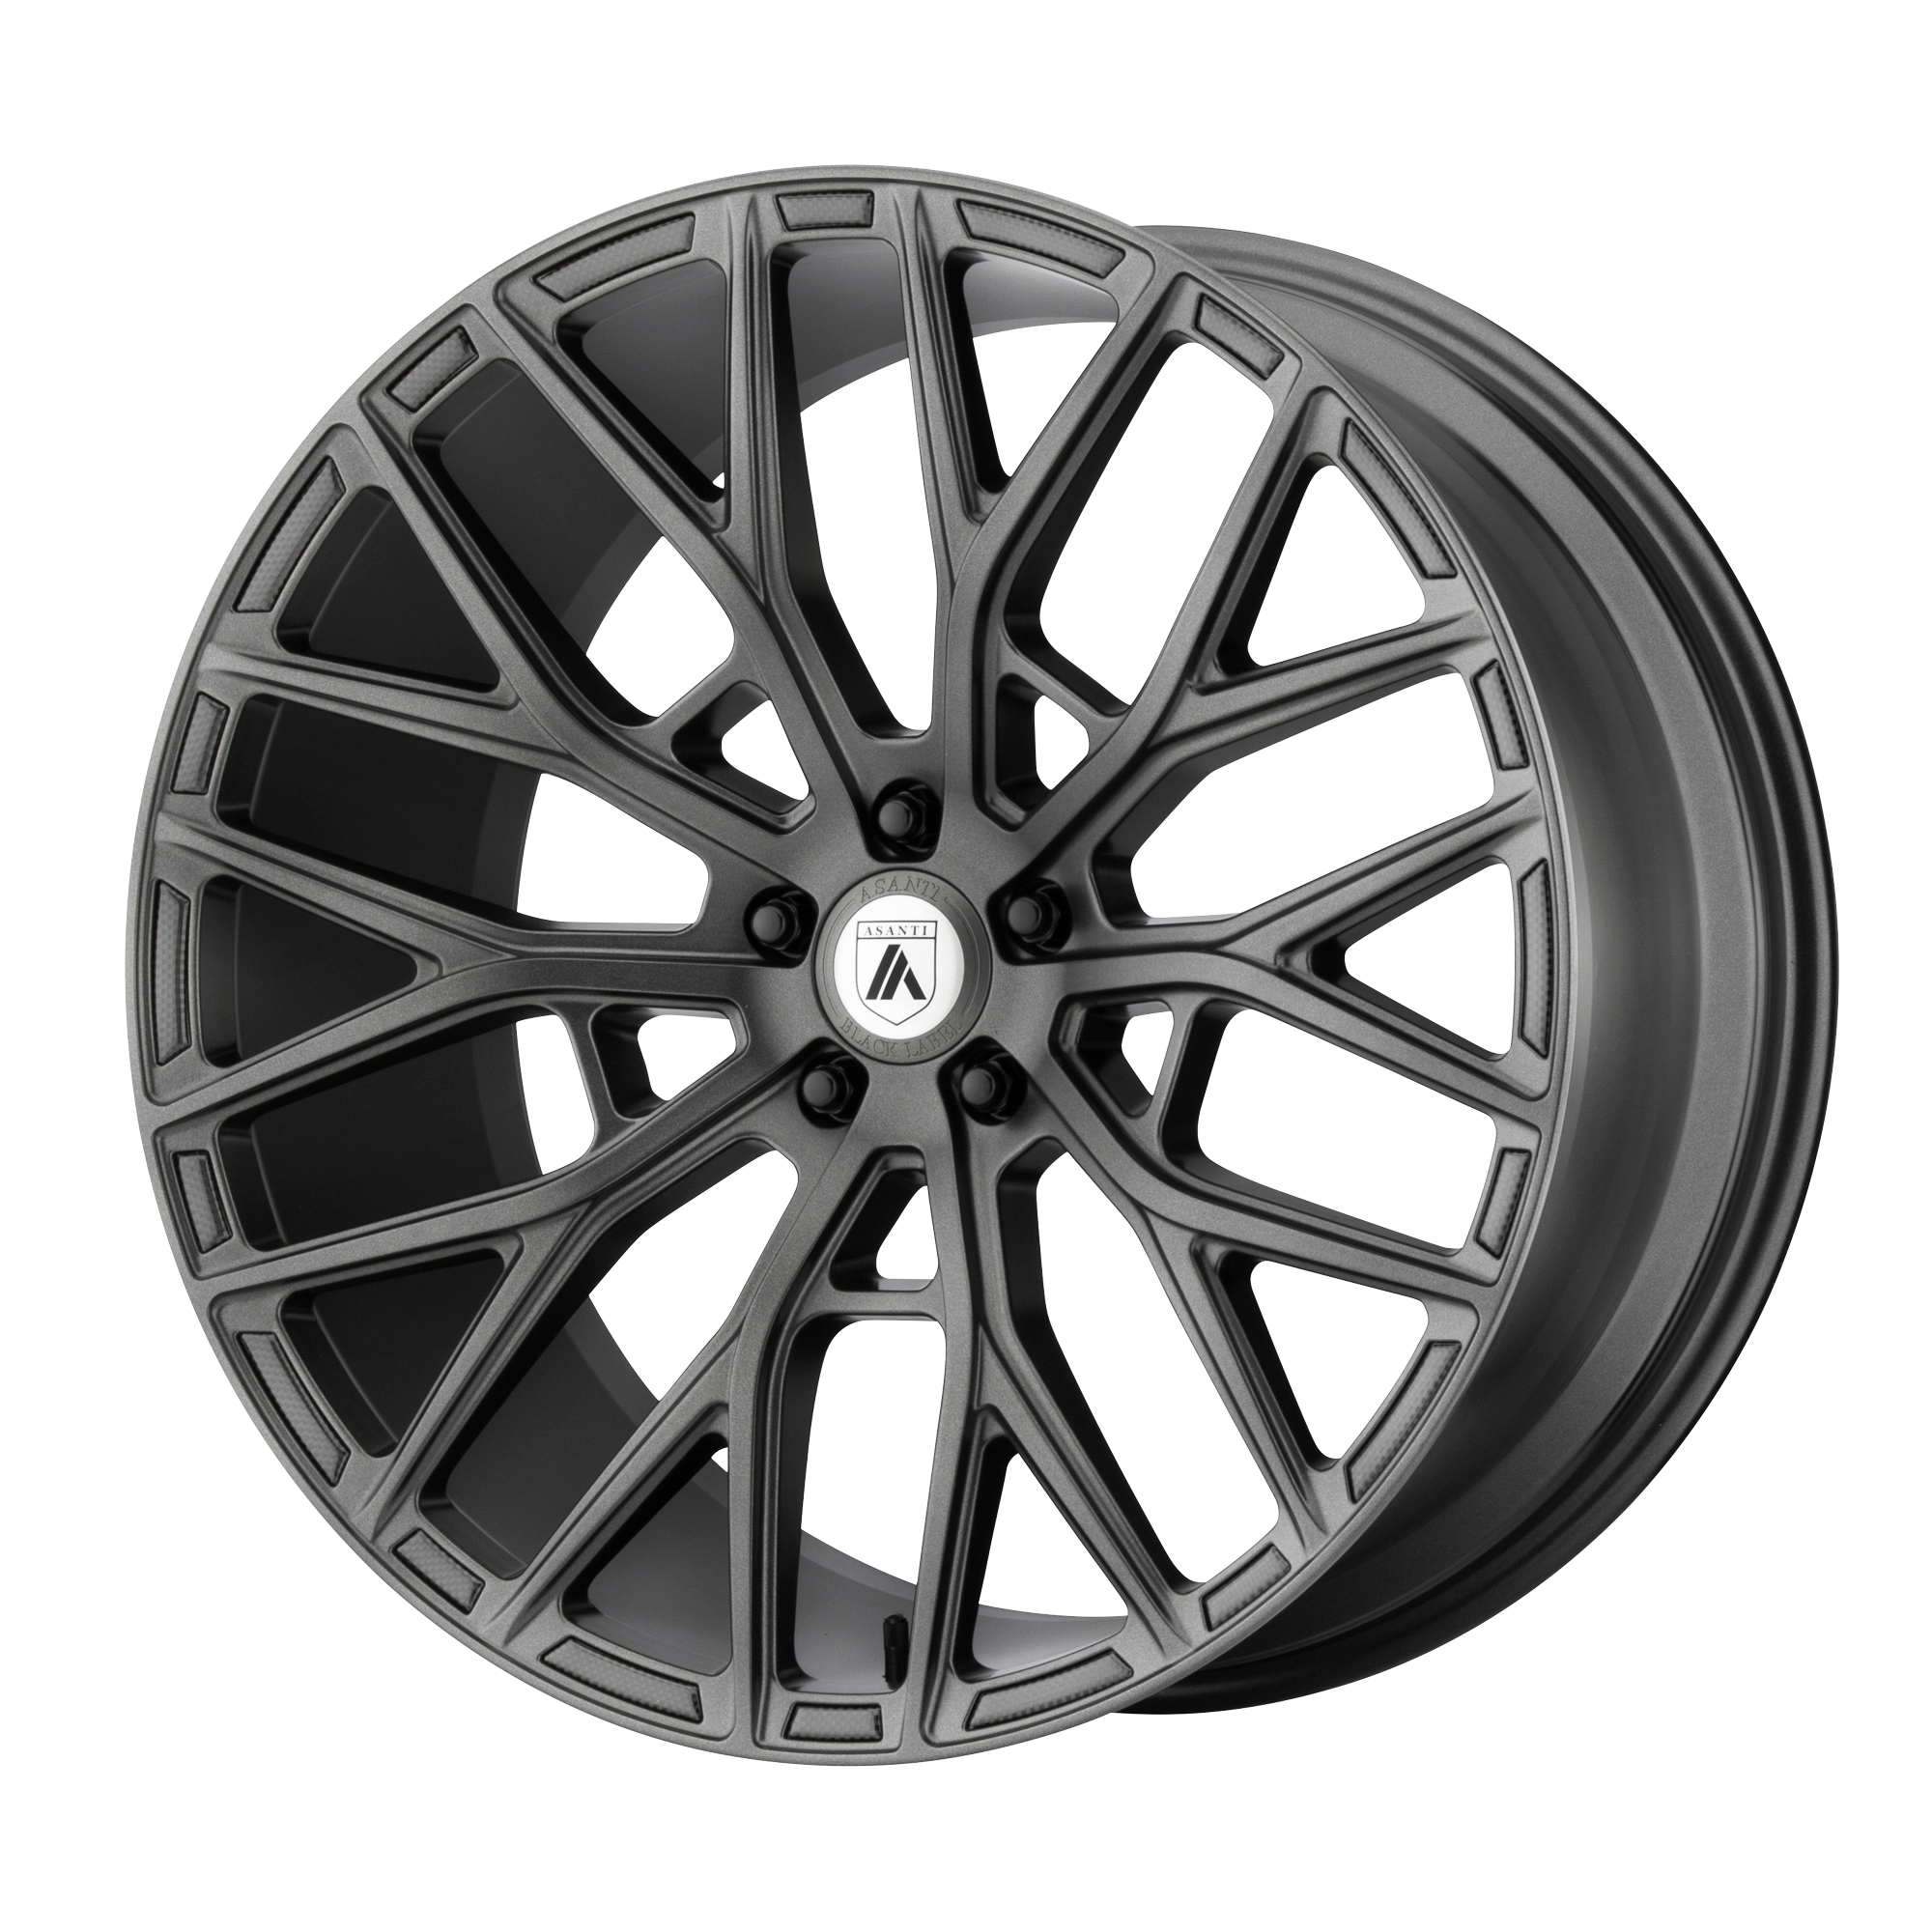 LEO 20x10.5 5x115.00 MATTE GRAPHITE (20 mm) - Tires and Engine Performance